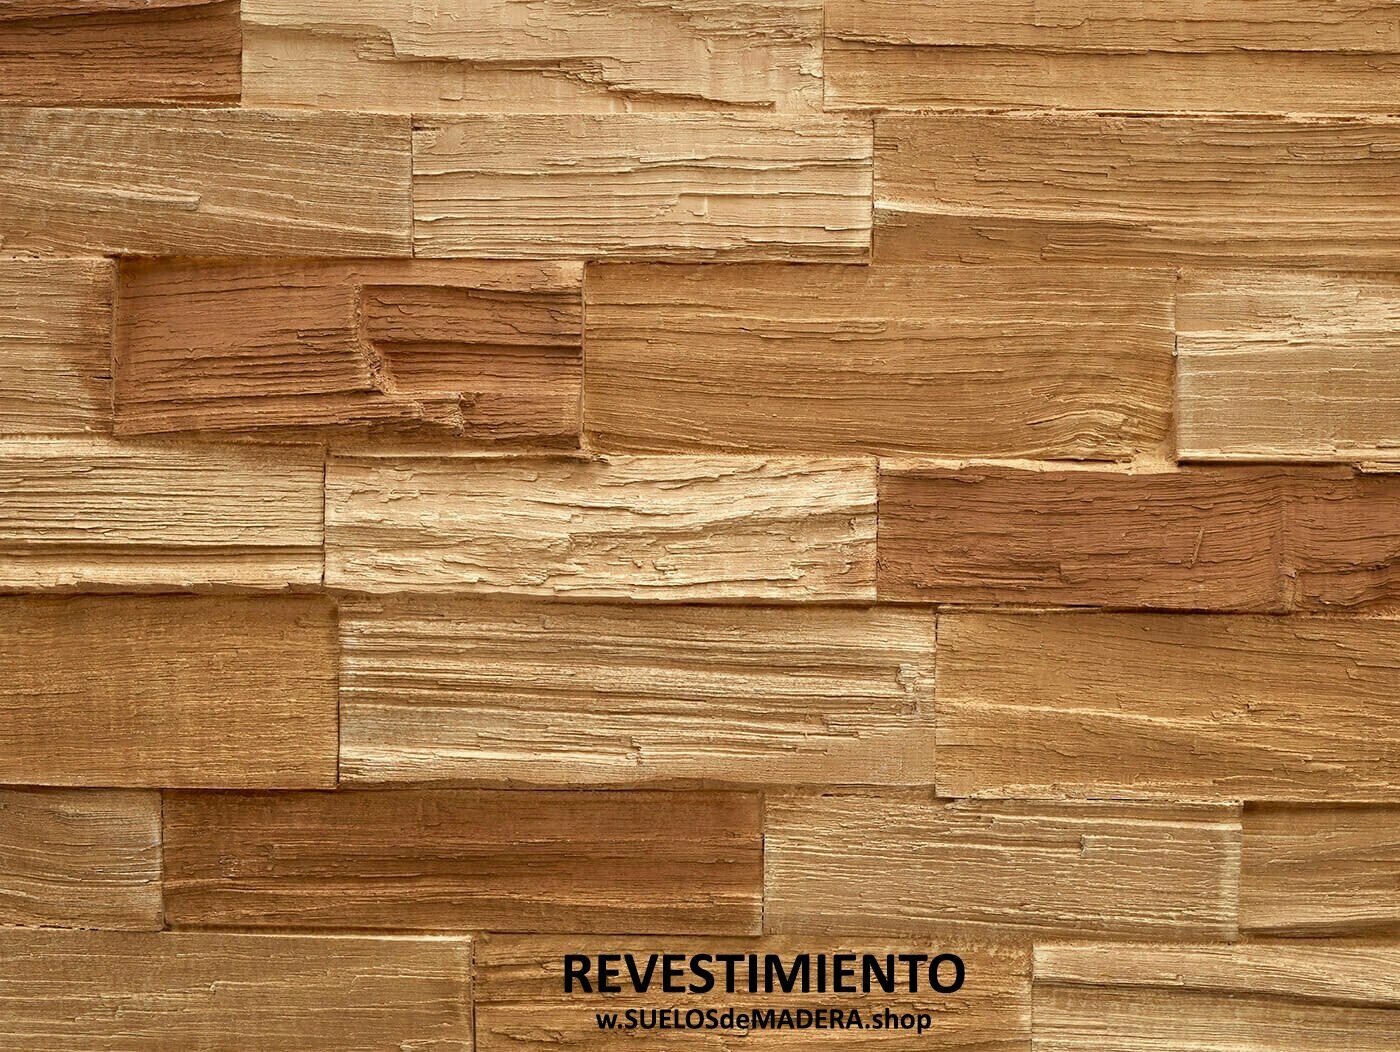 Revestimiento MSD WALL Realistic Madera desde 45,69€/m2